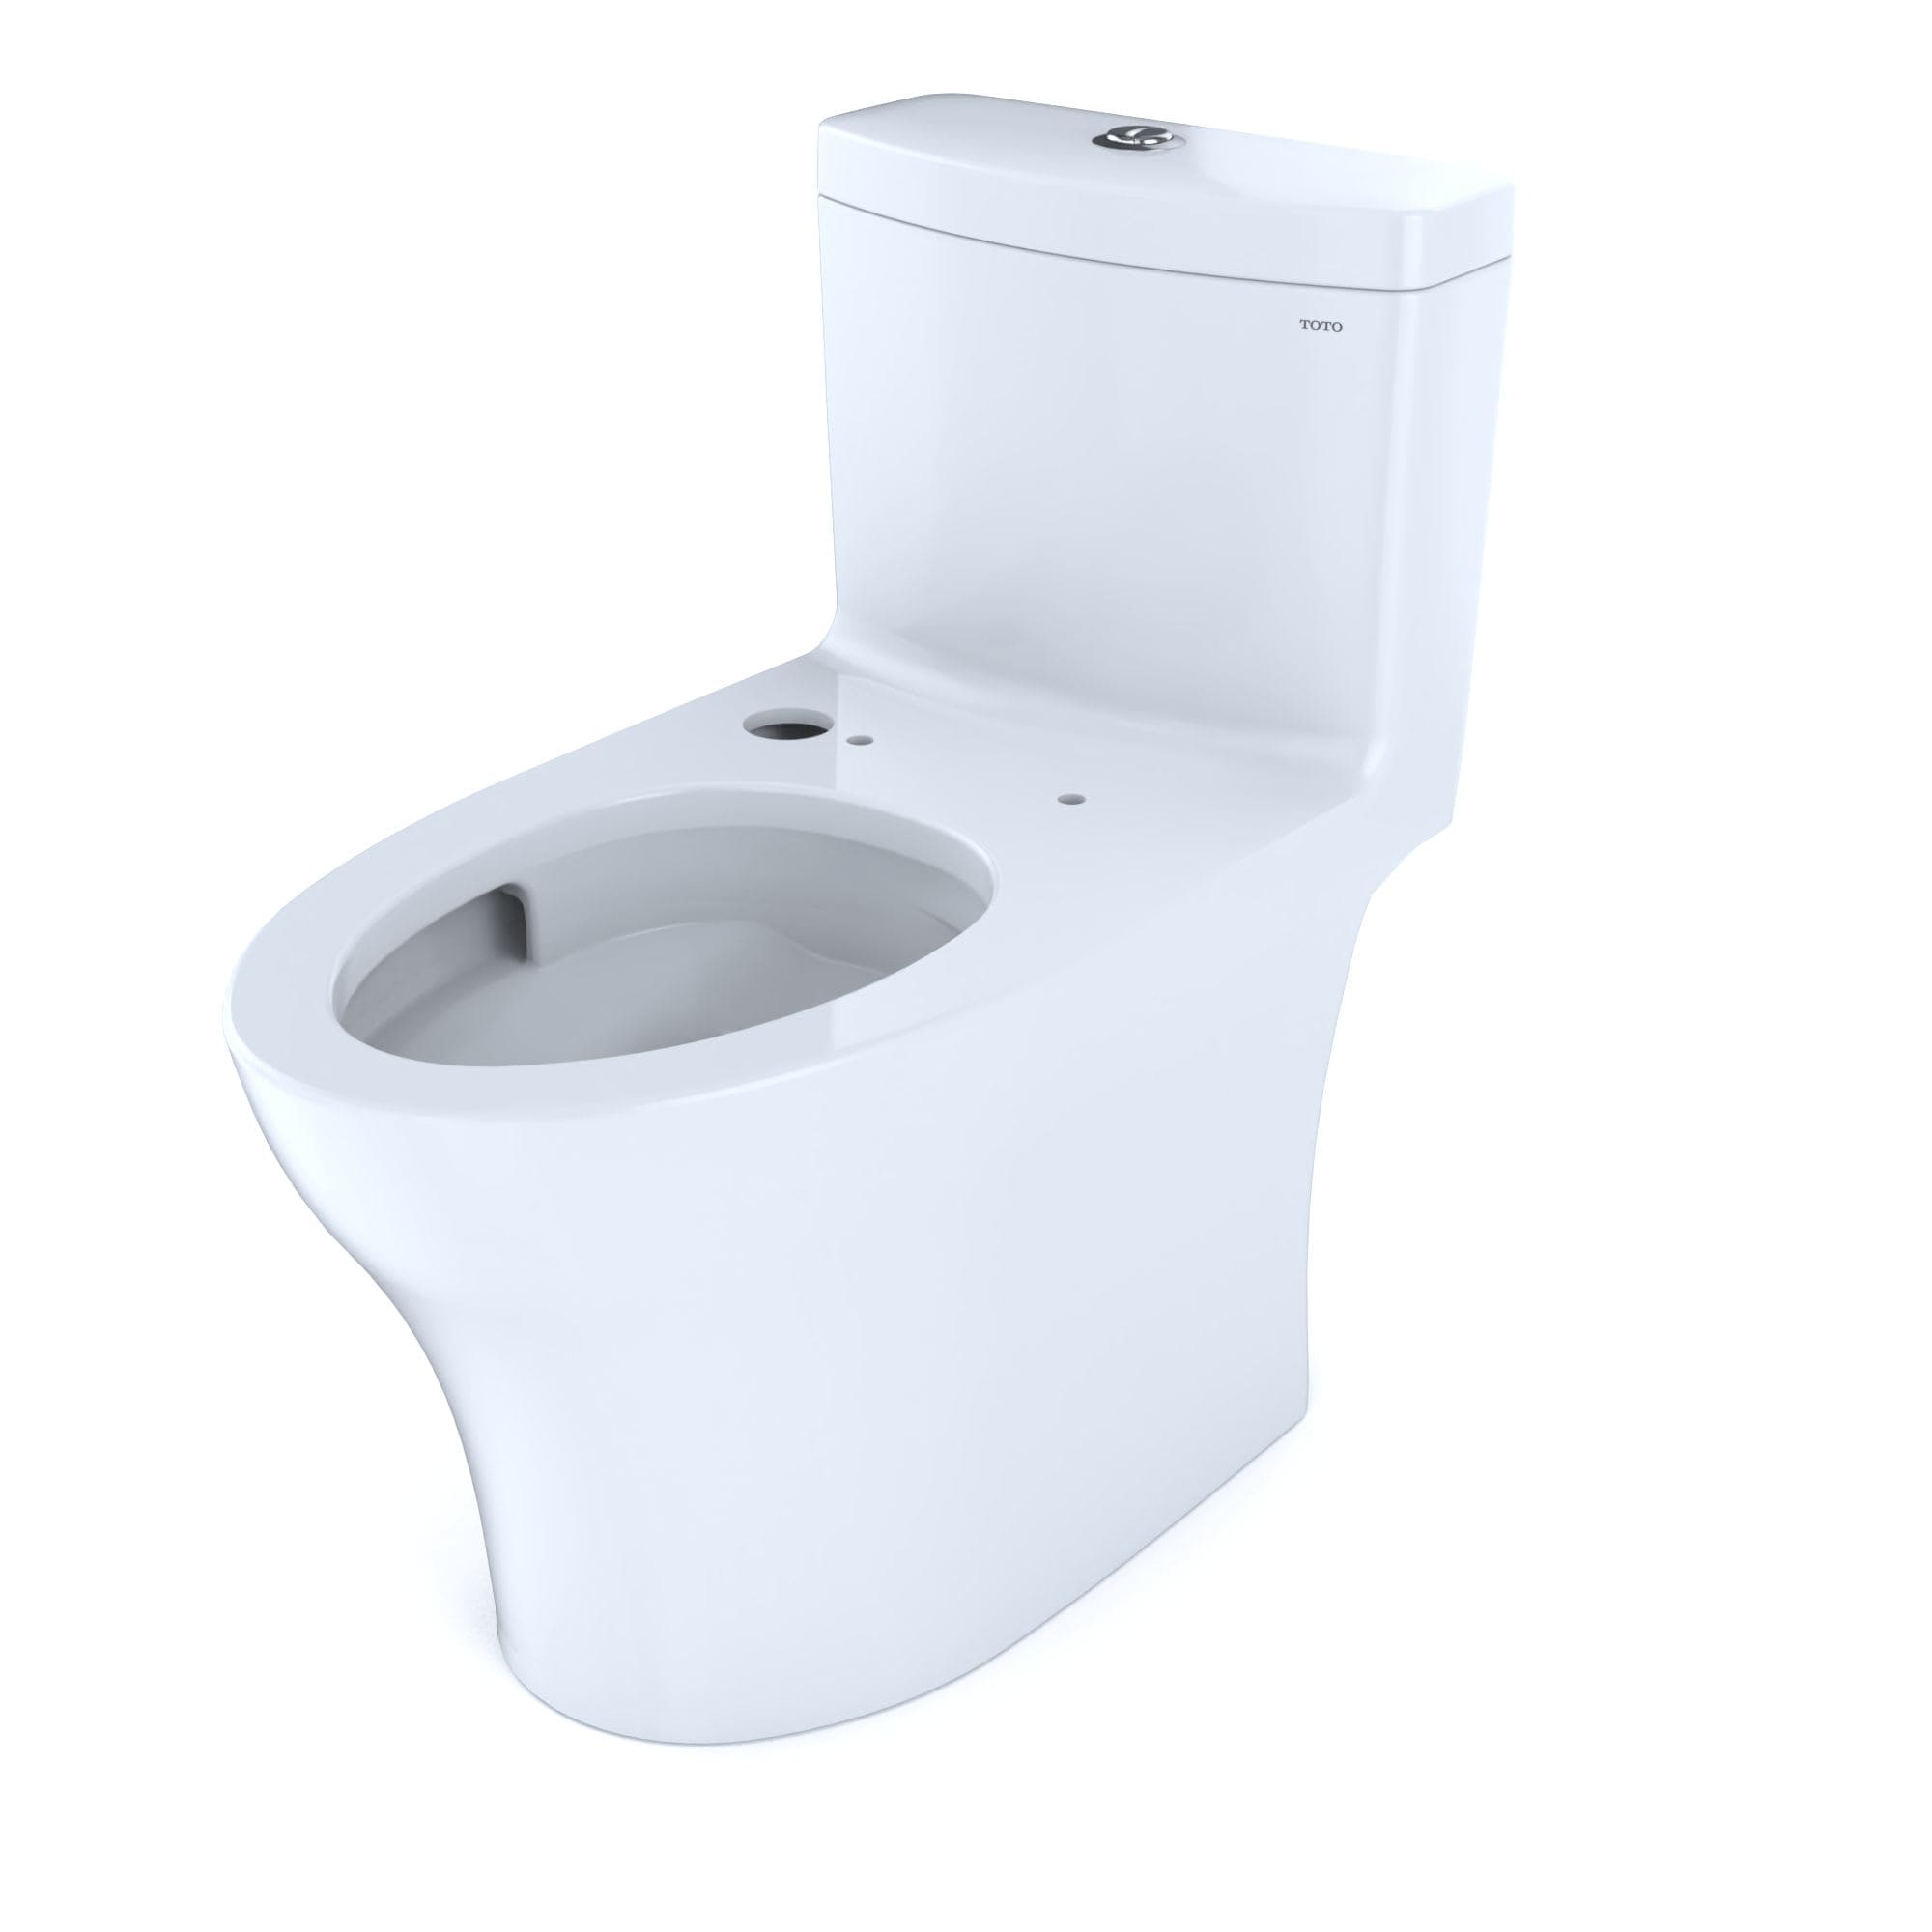 TOTO Cotton Dual Flush Elongated Standard Height WaterSense Toilet 12-in Rough-In 1.28-GPF in White | CST646CEMFGNAT40-01 -  CST646CEMFGNAT40#01